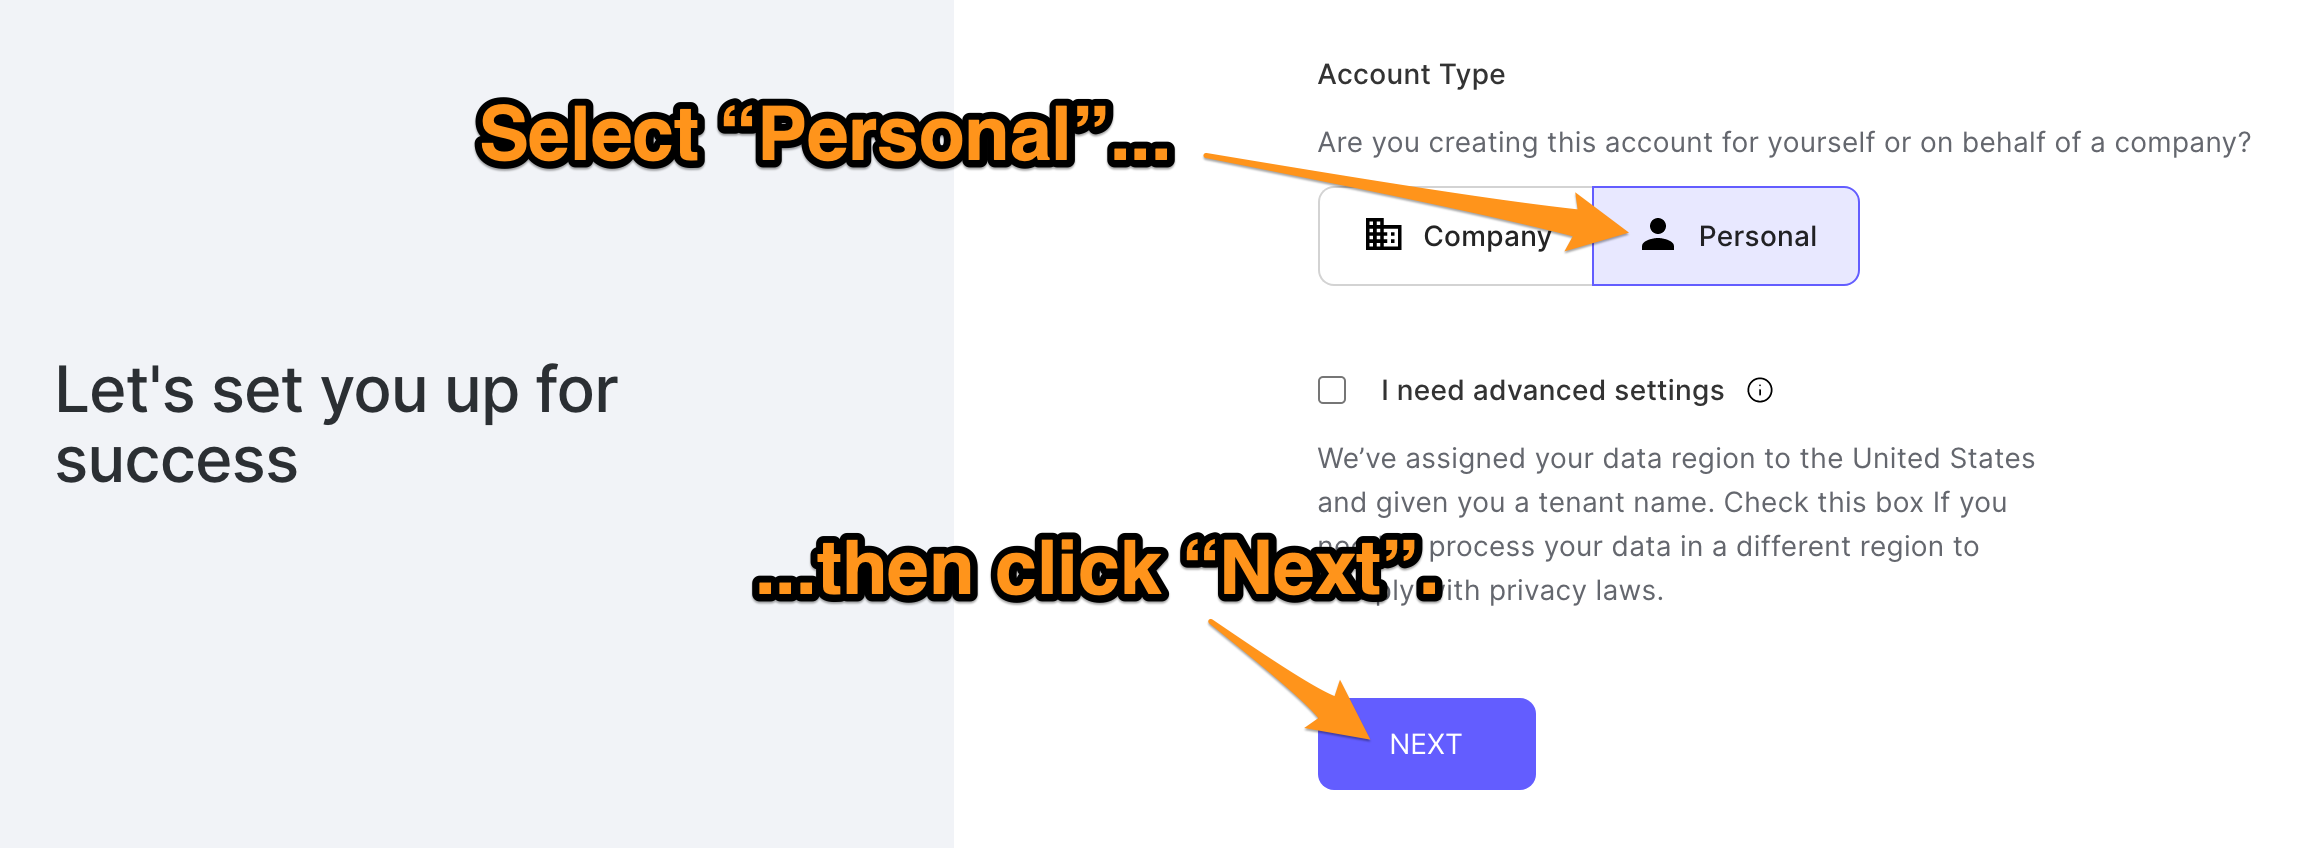 The “Let’s set you up for success” page. The reader is directed to select the “Personal” account type and click the “Next” button.